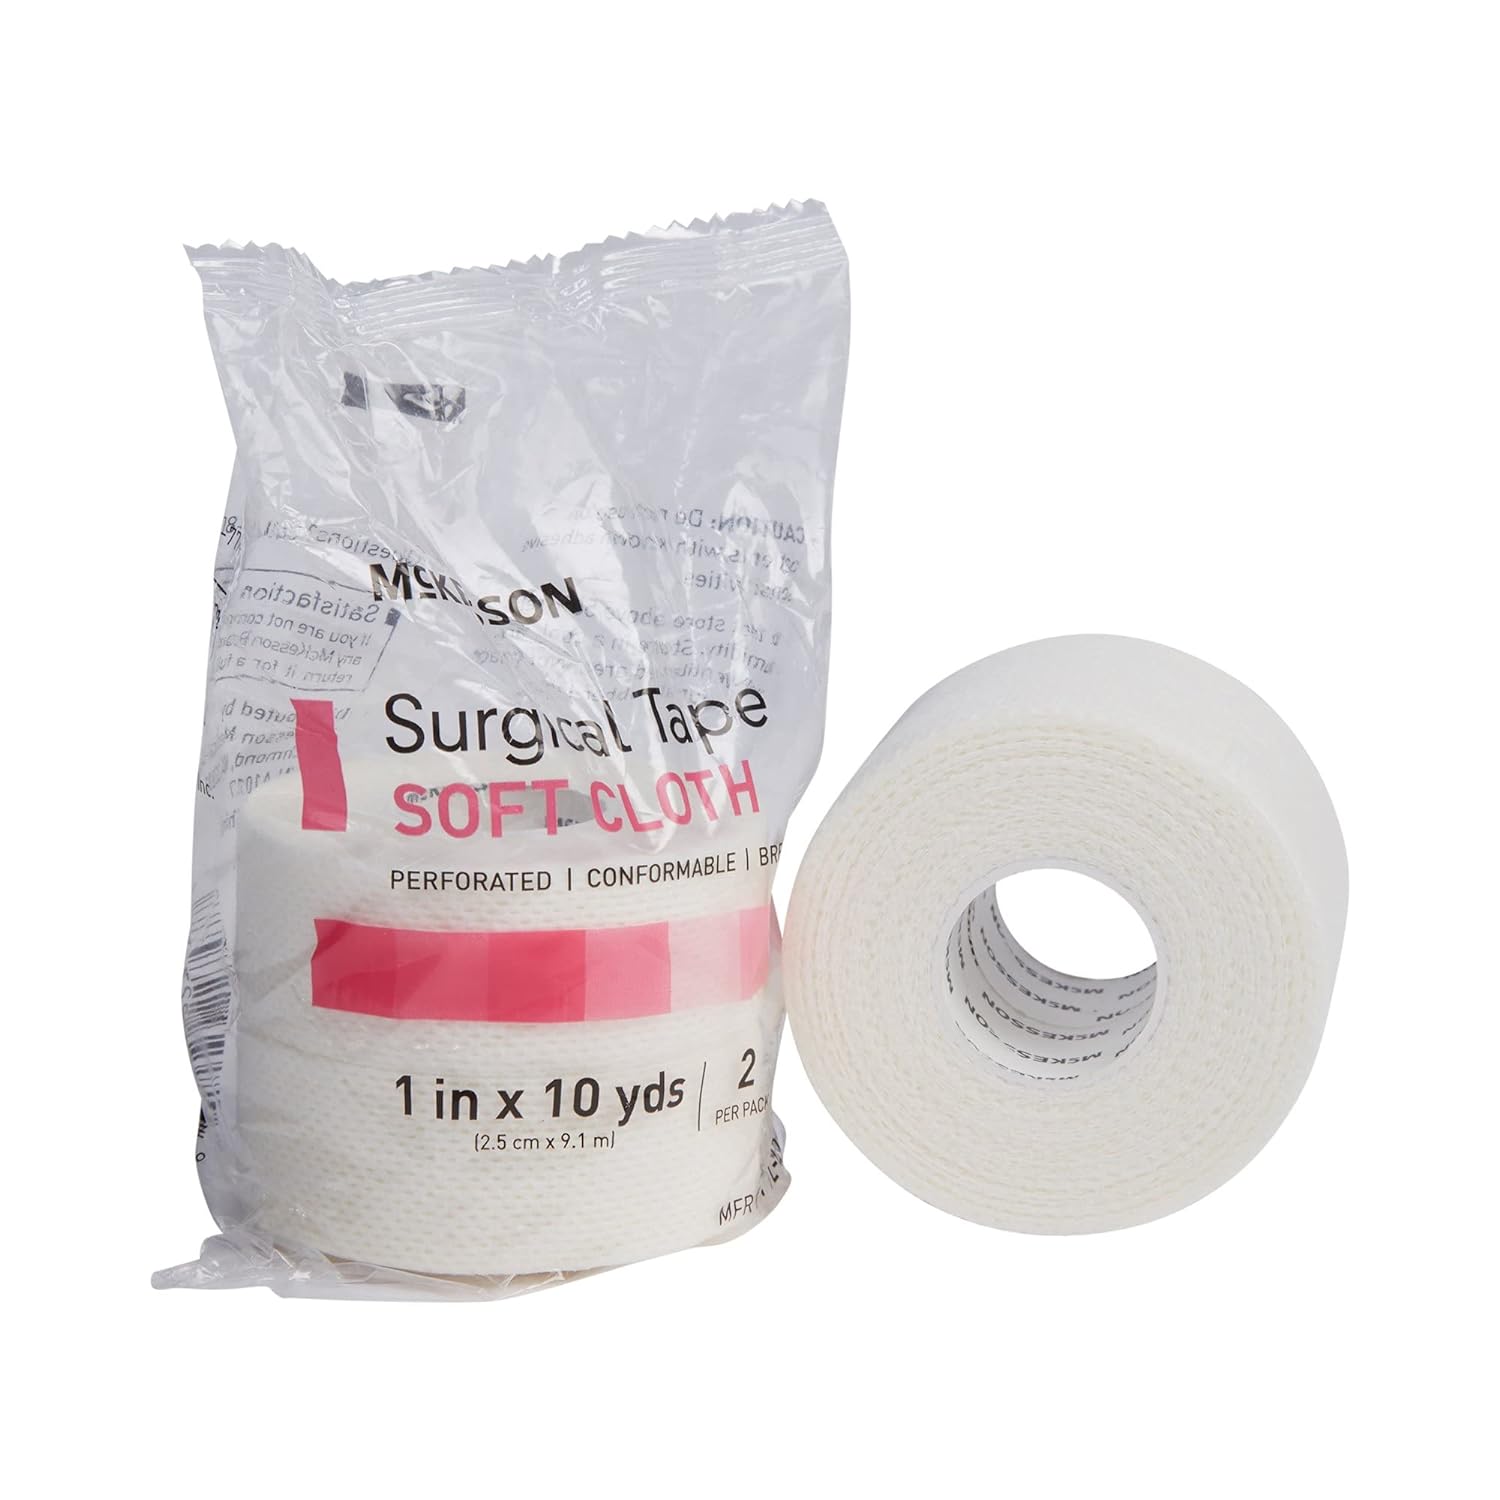 McKesson Surgical Tapes, Non-Sterile, Soft Cloth, Breathable, 1 in x 10 yd, 2 Rolls, 1 Pack